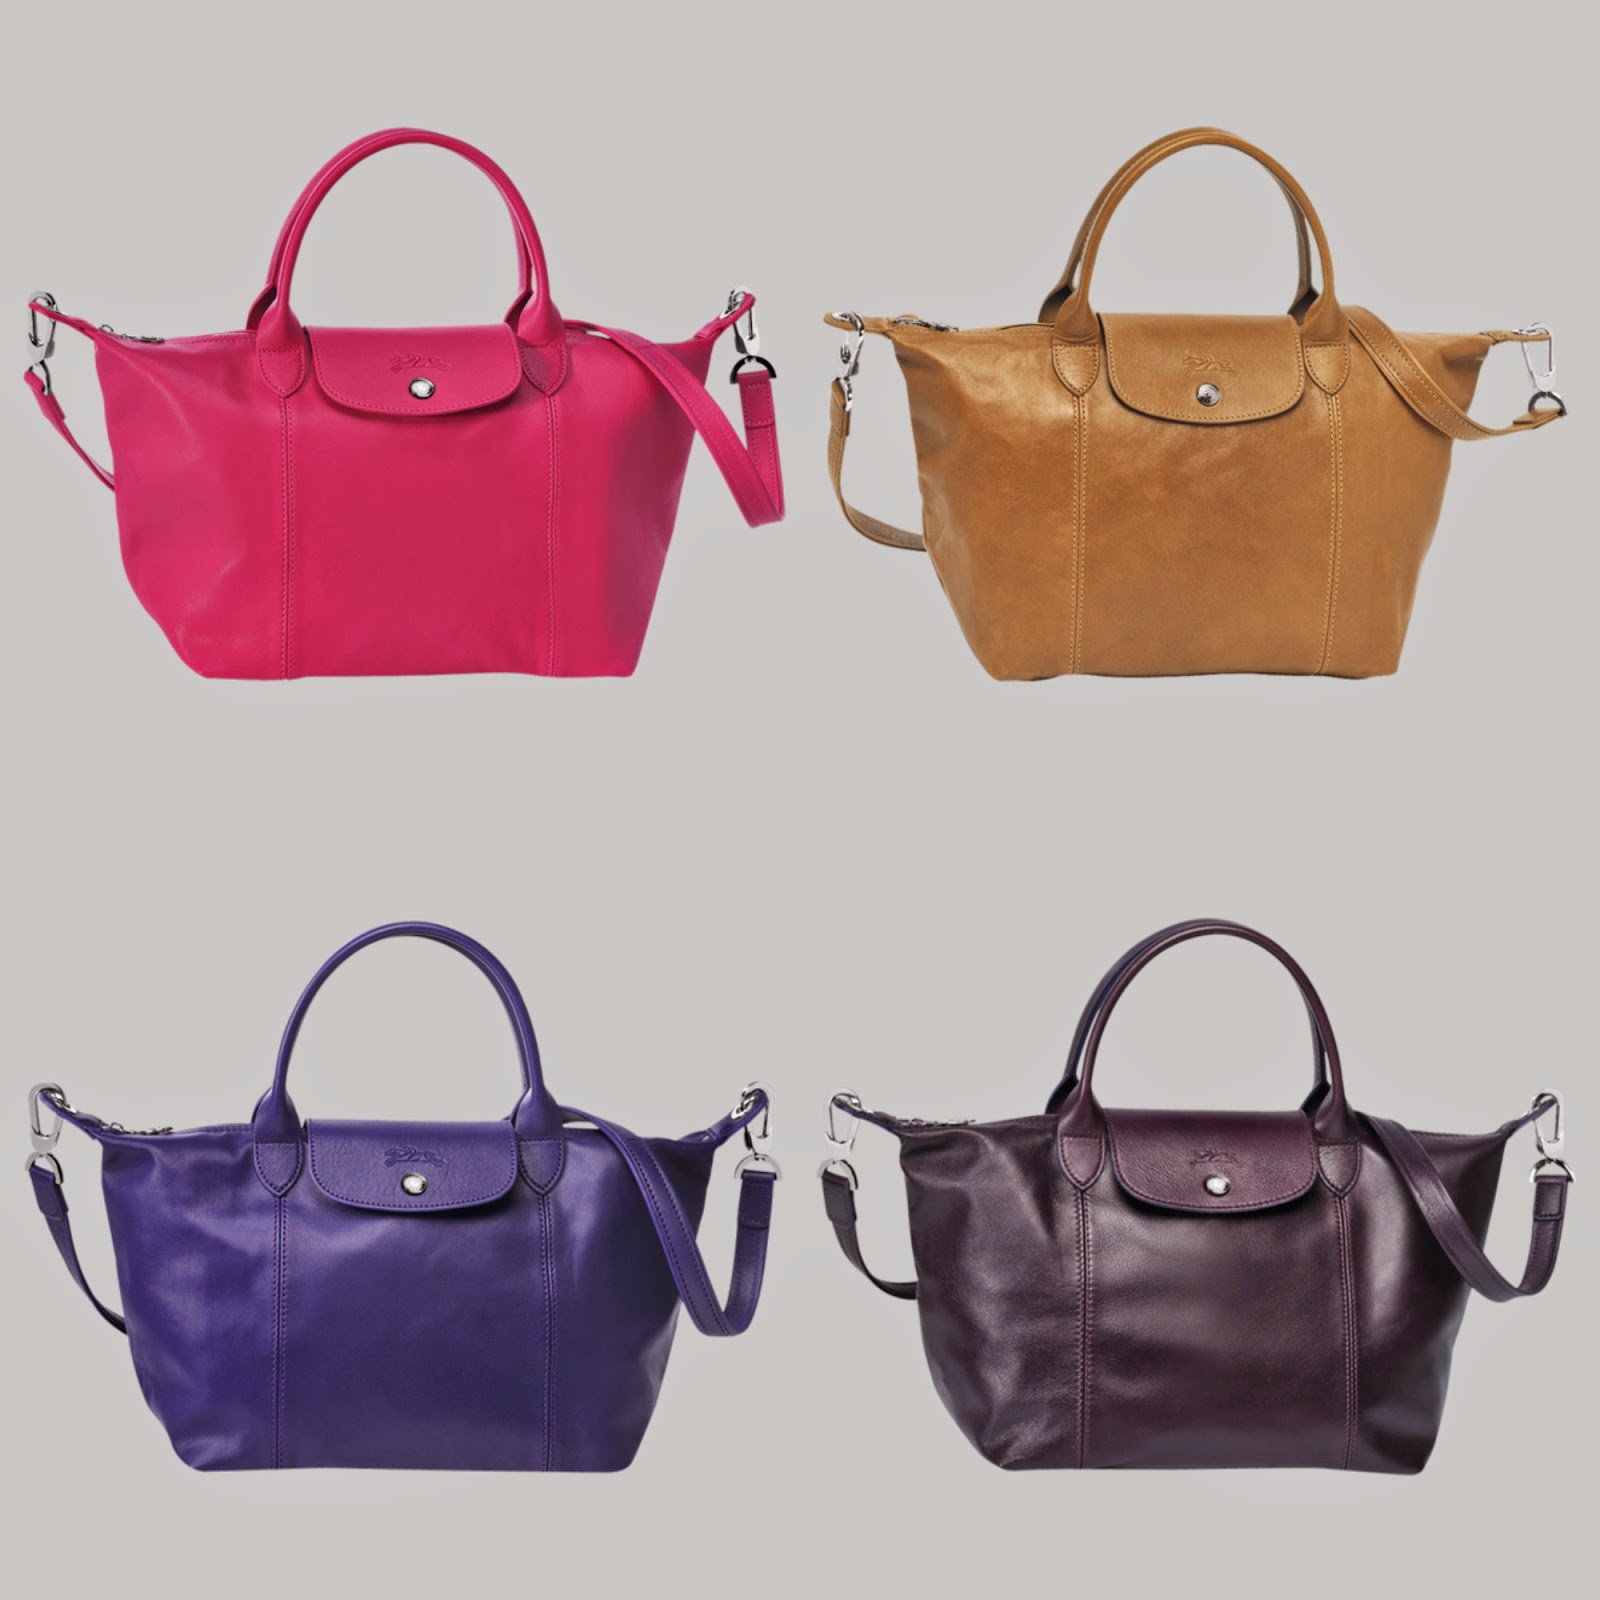 Longchamp: Get yours now from Europe